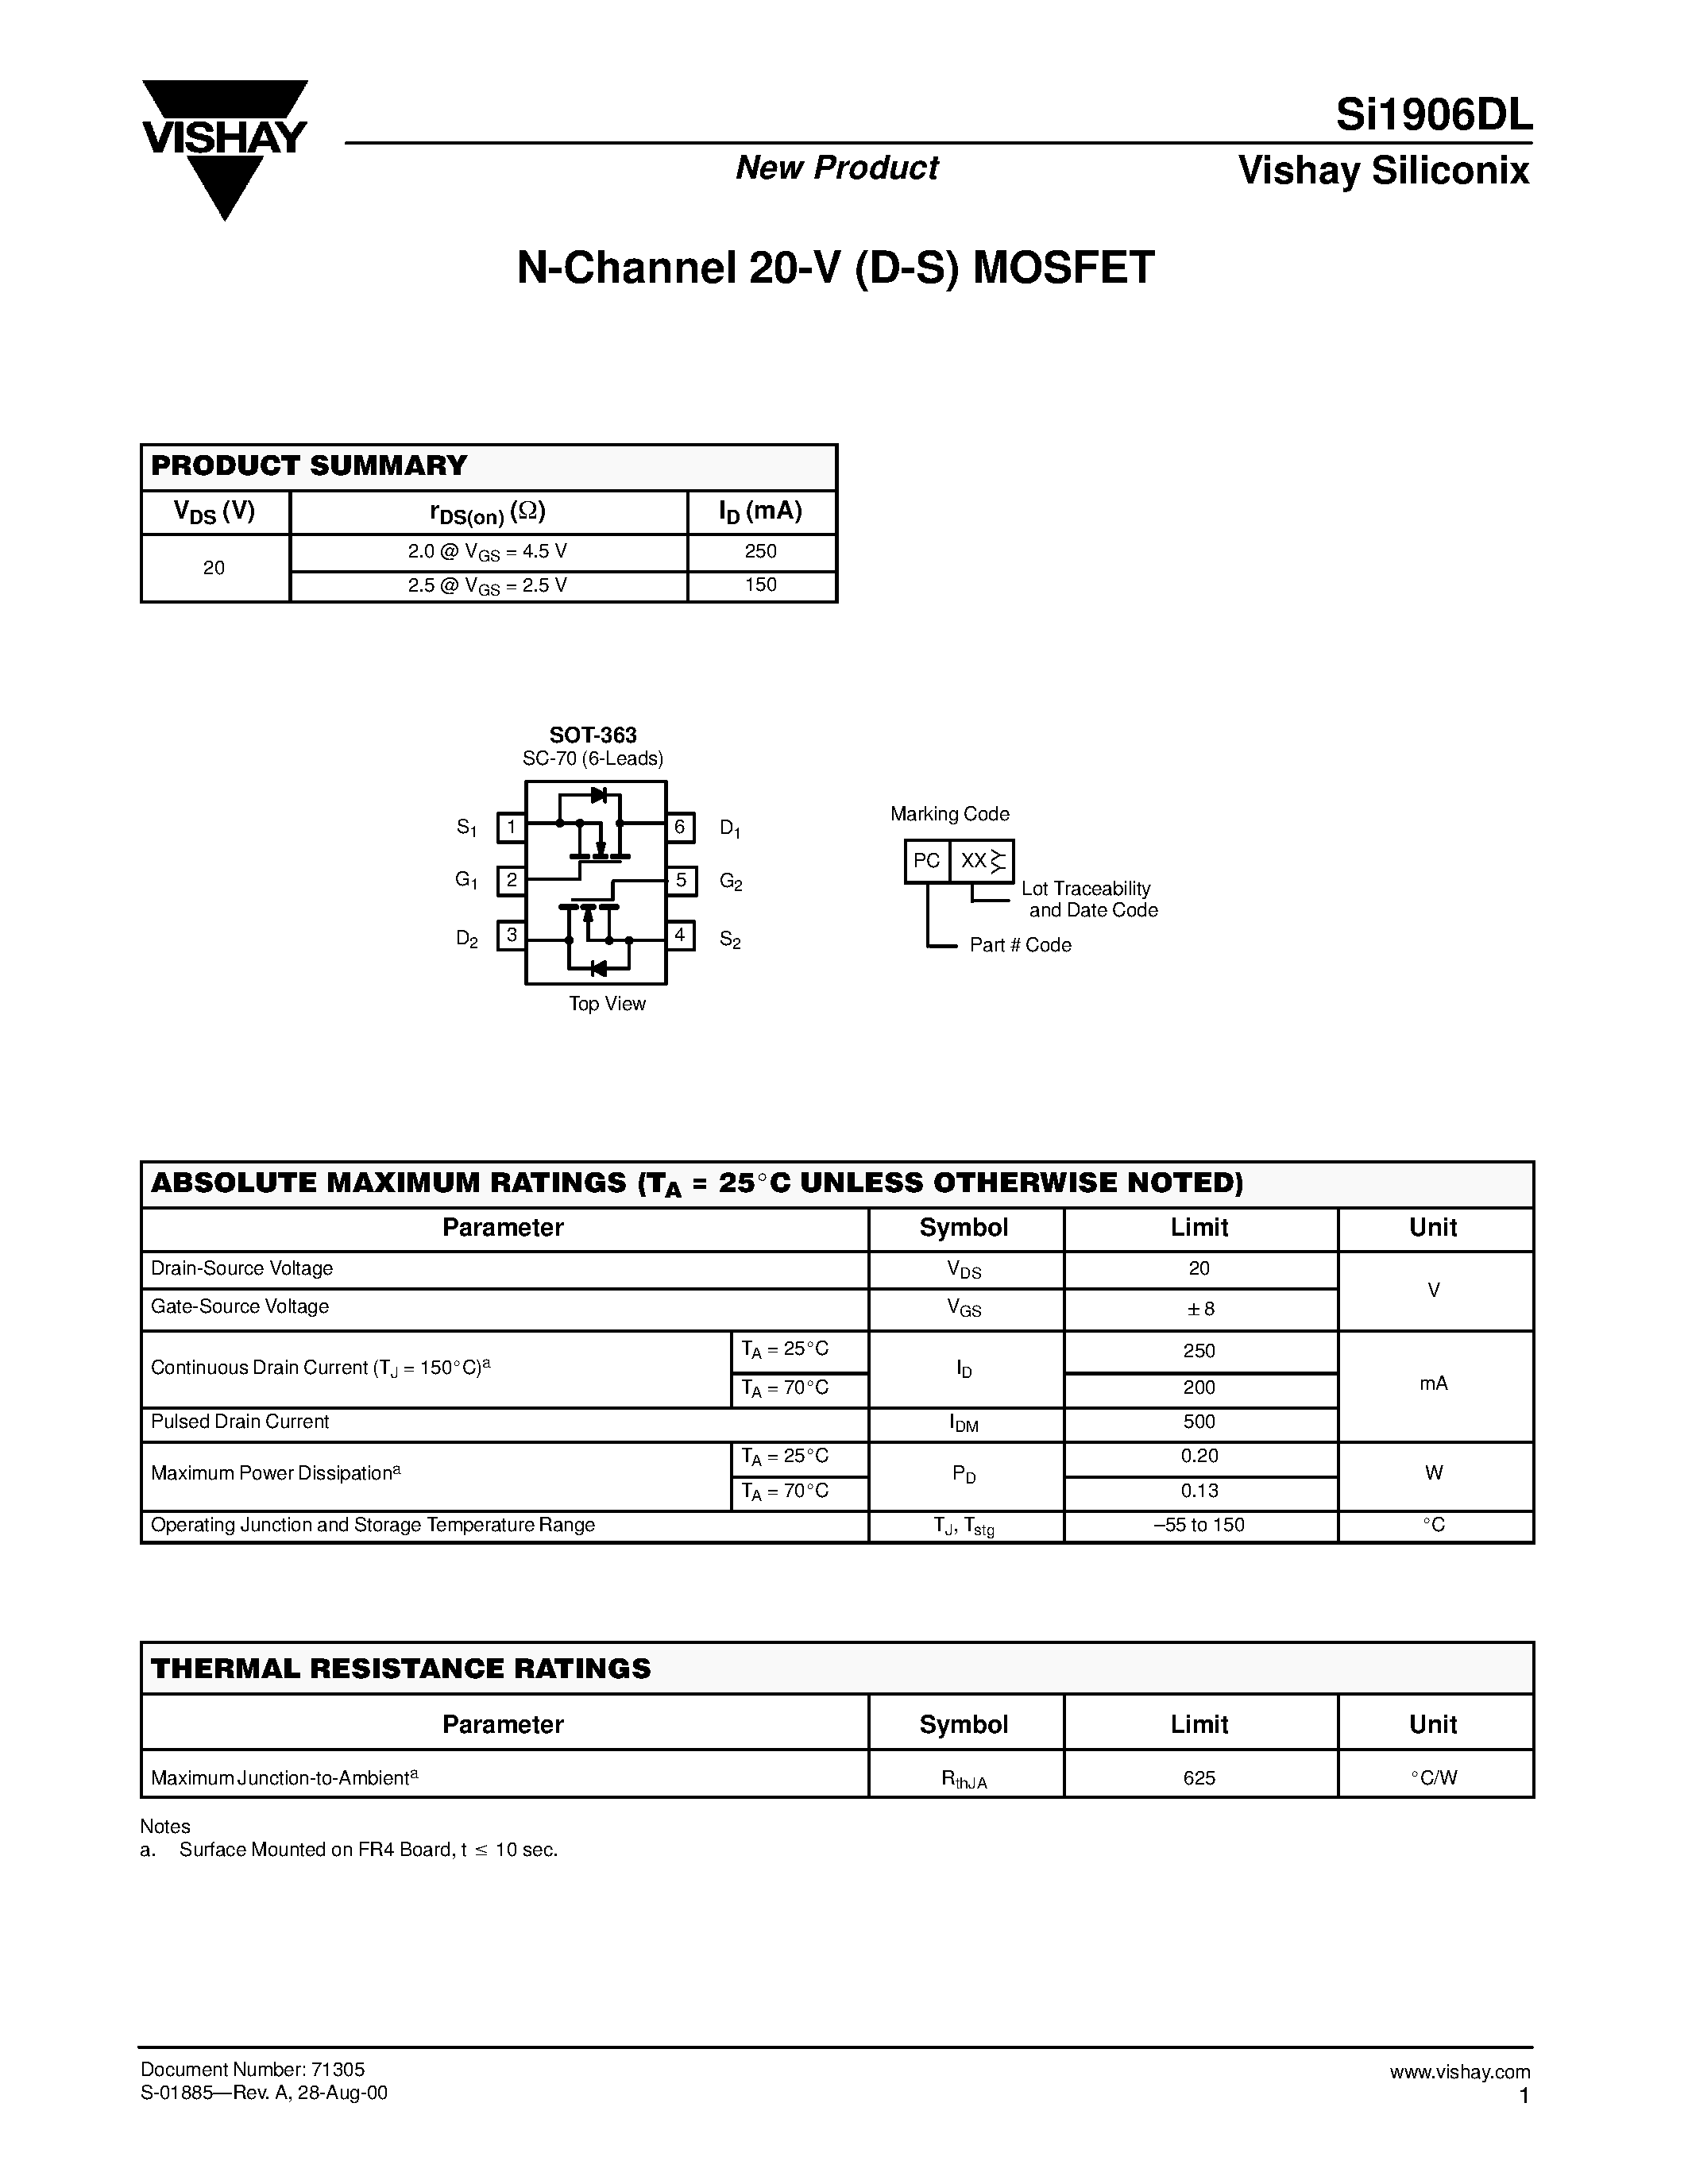 Datasheet SI1906DL - N-Channel 20-V (D-S) MOSFET page 1